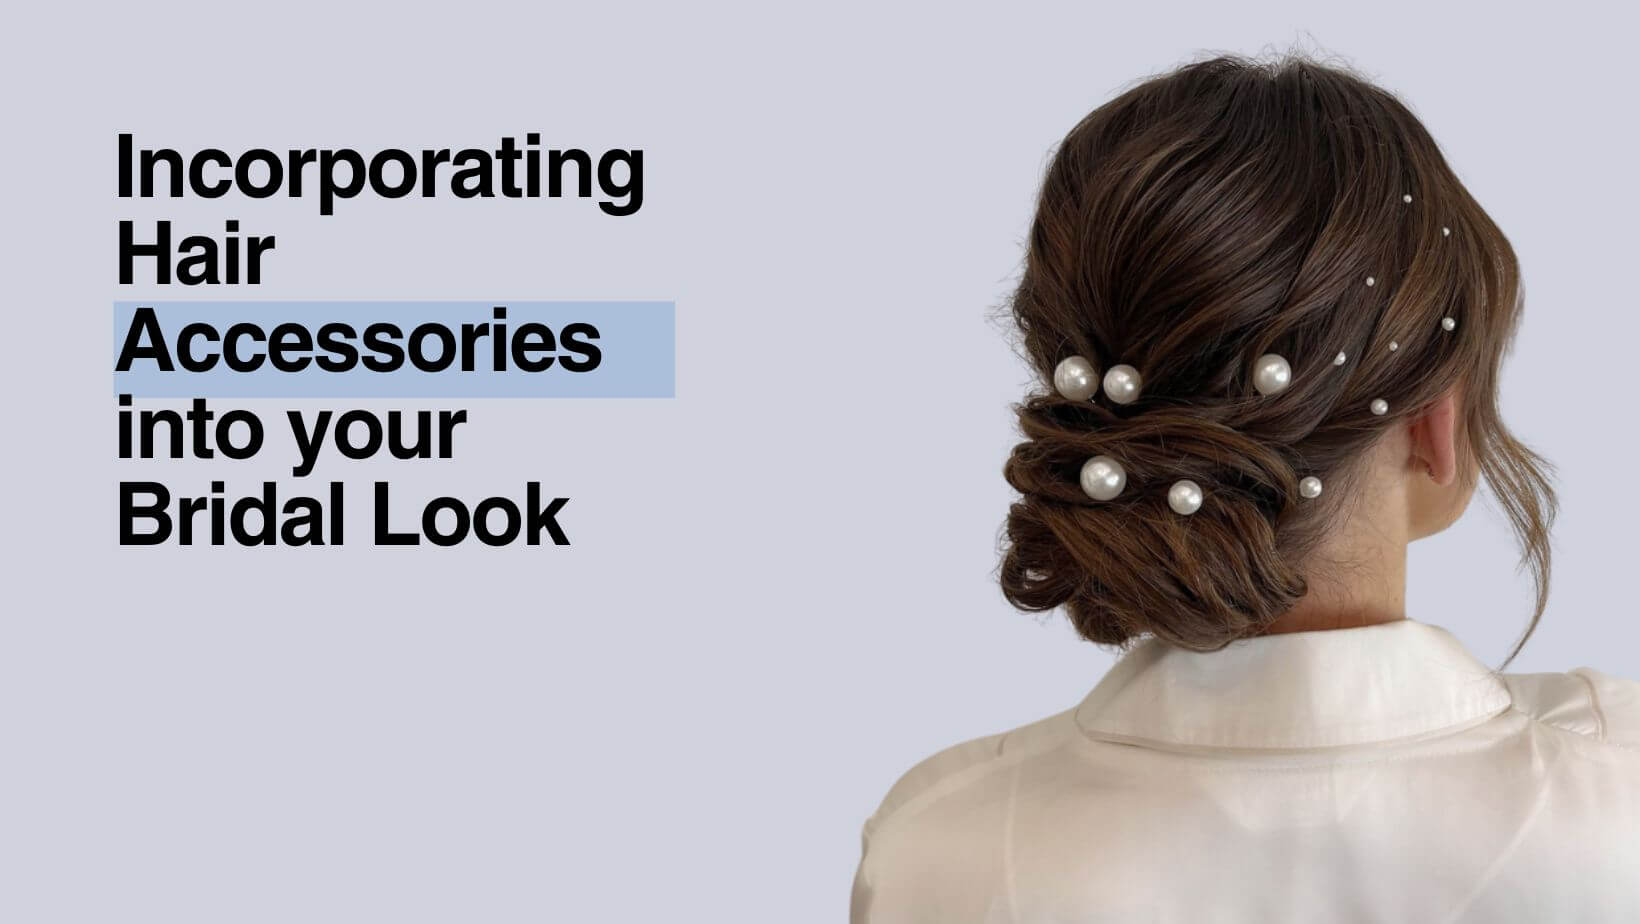 Incorporating Hair Accessories into your Bridal Look